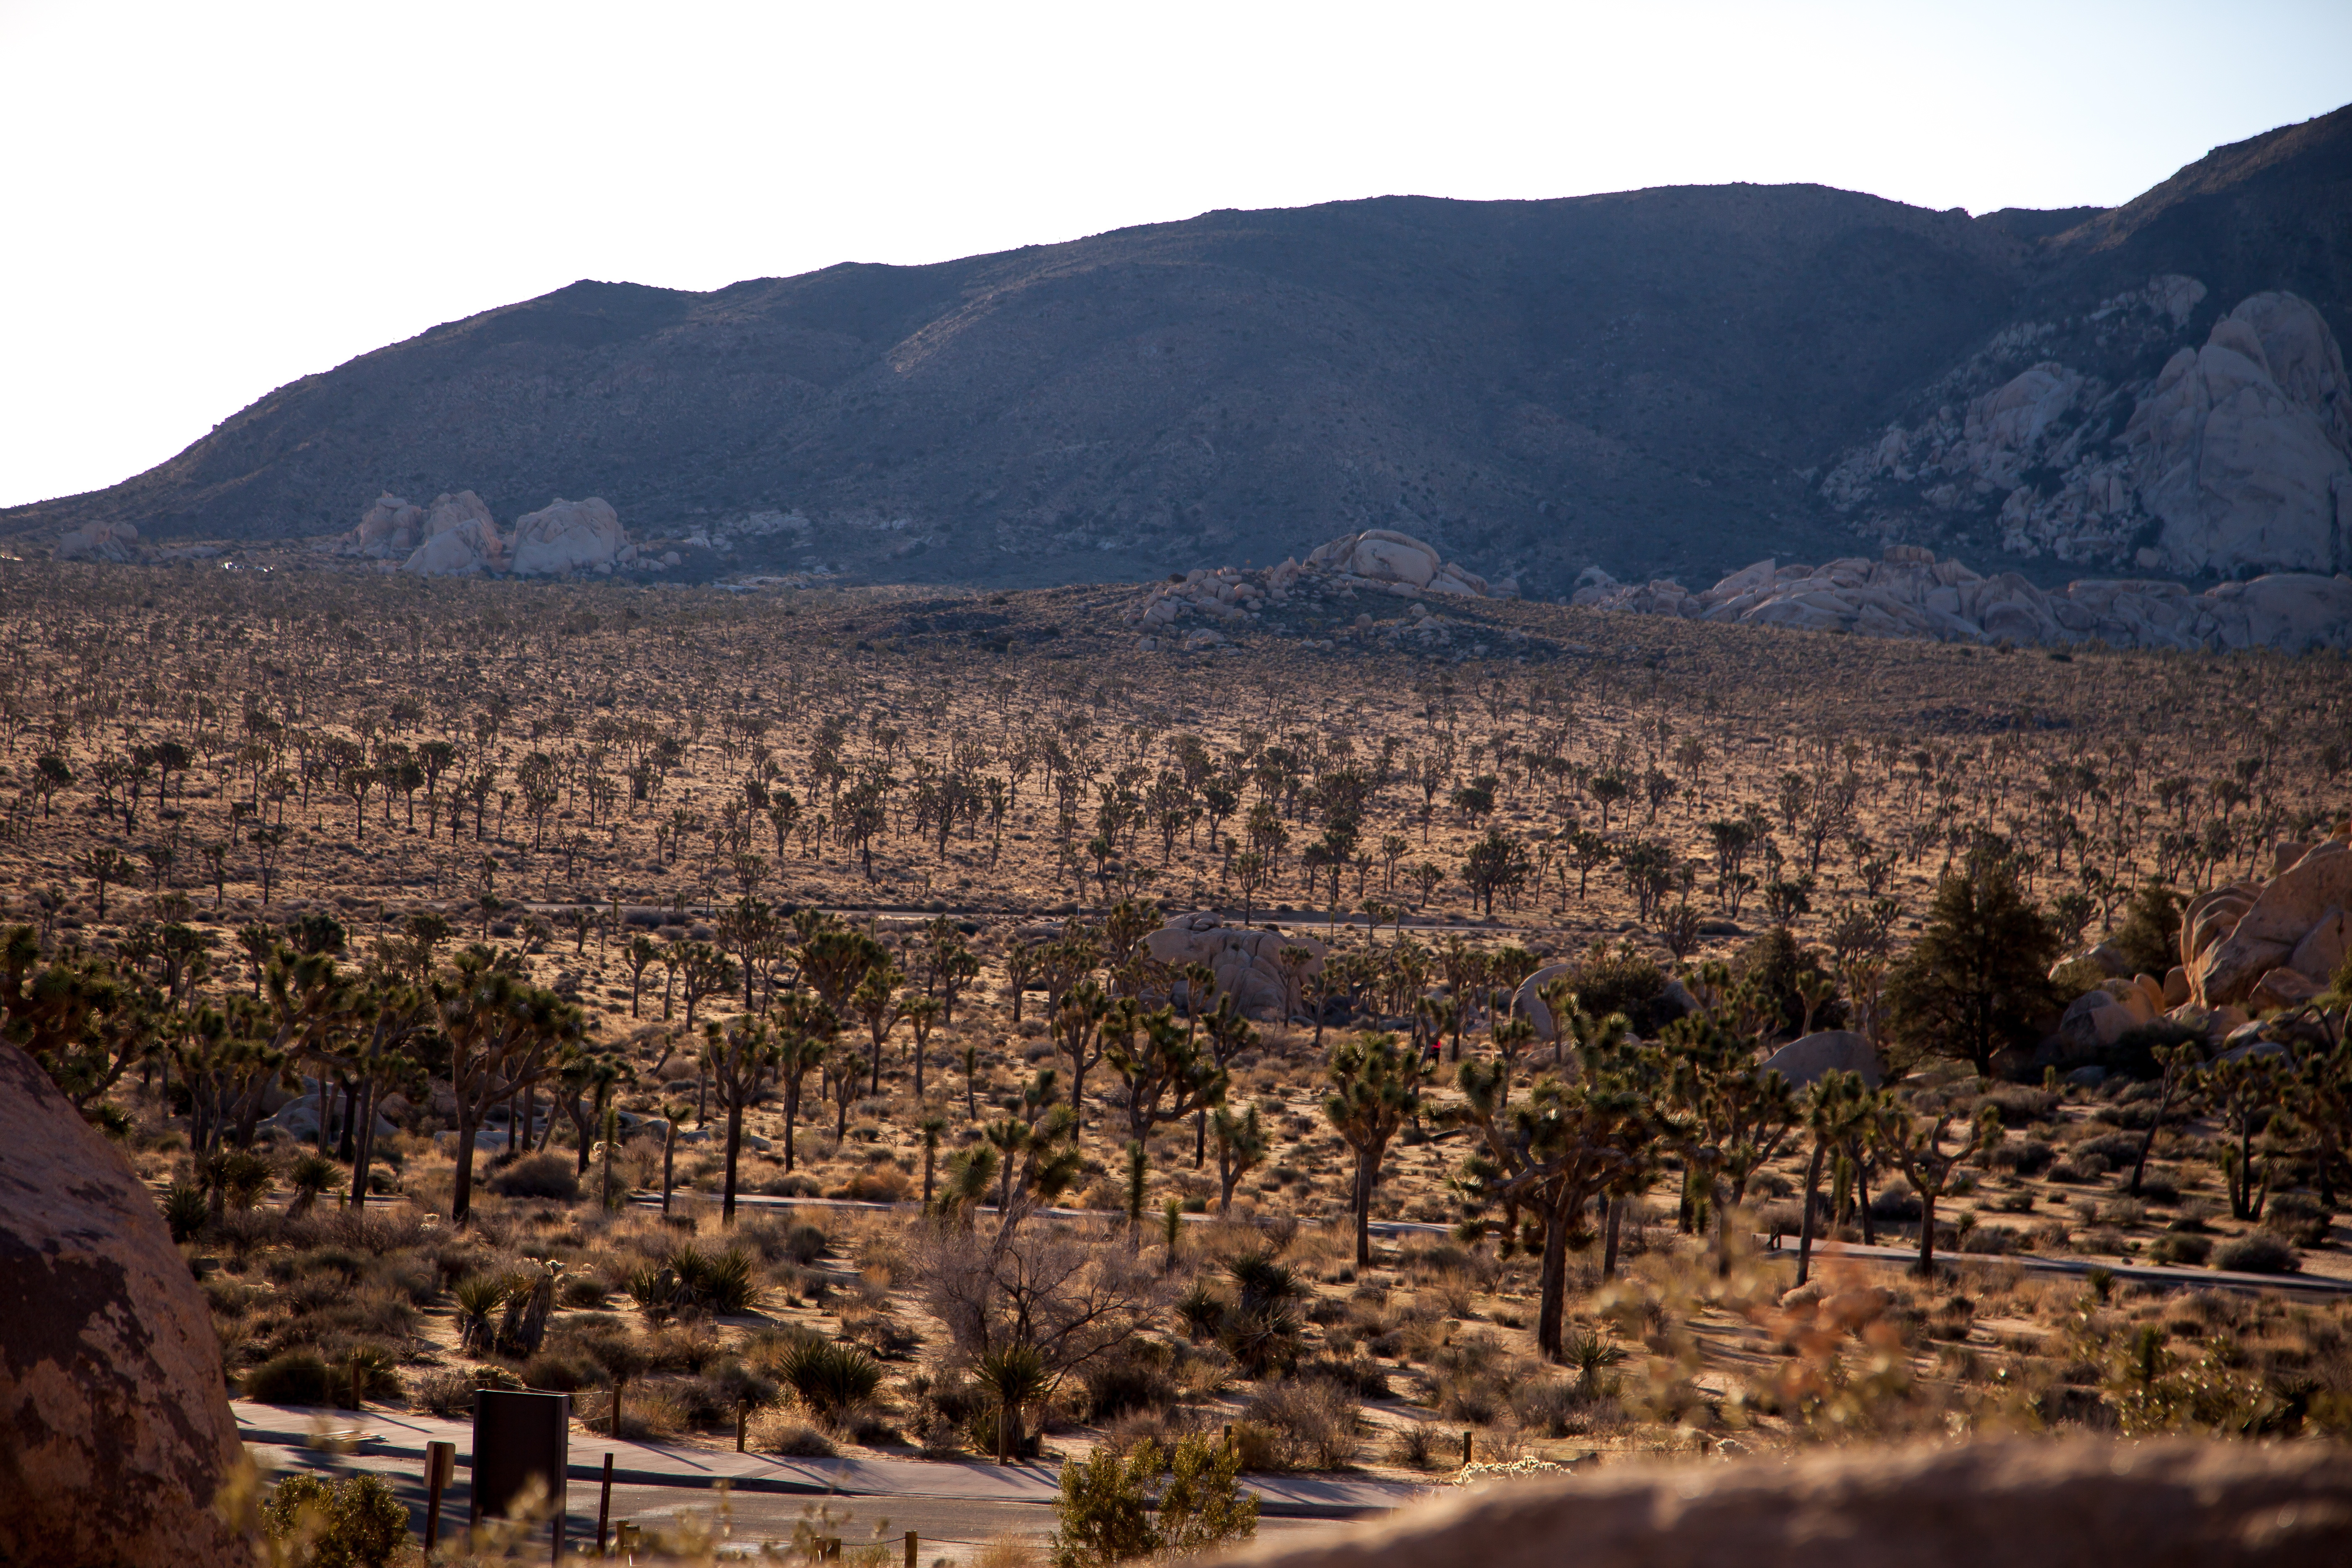 a veritable forest of Joshua trees